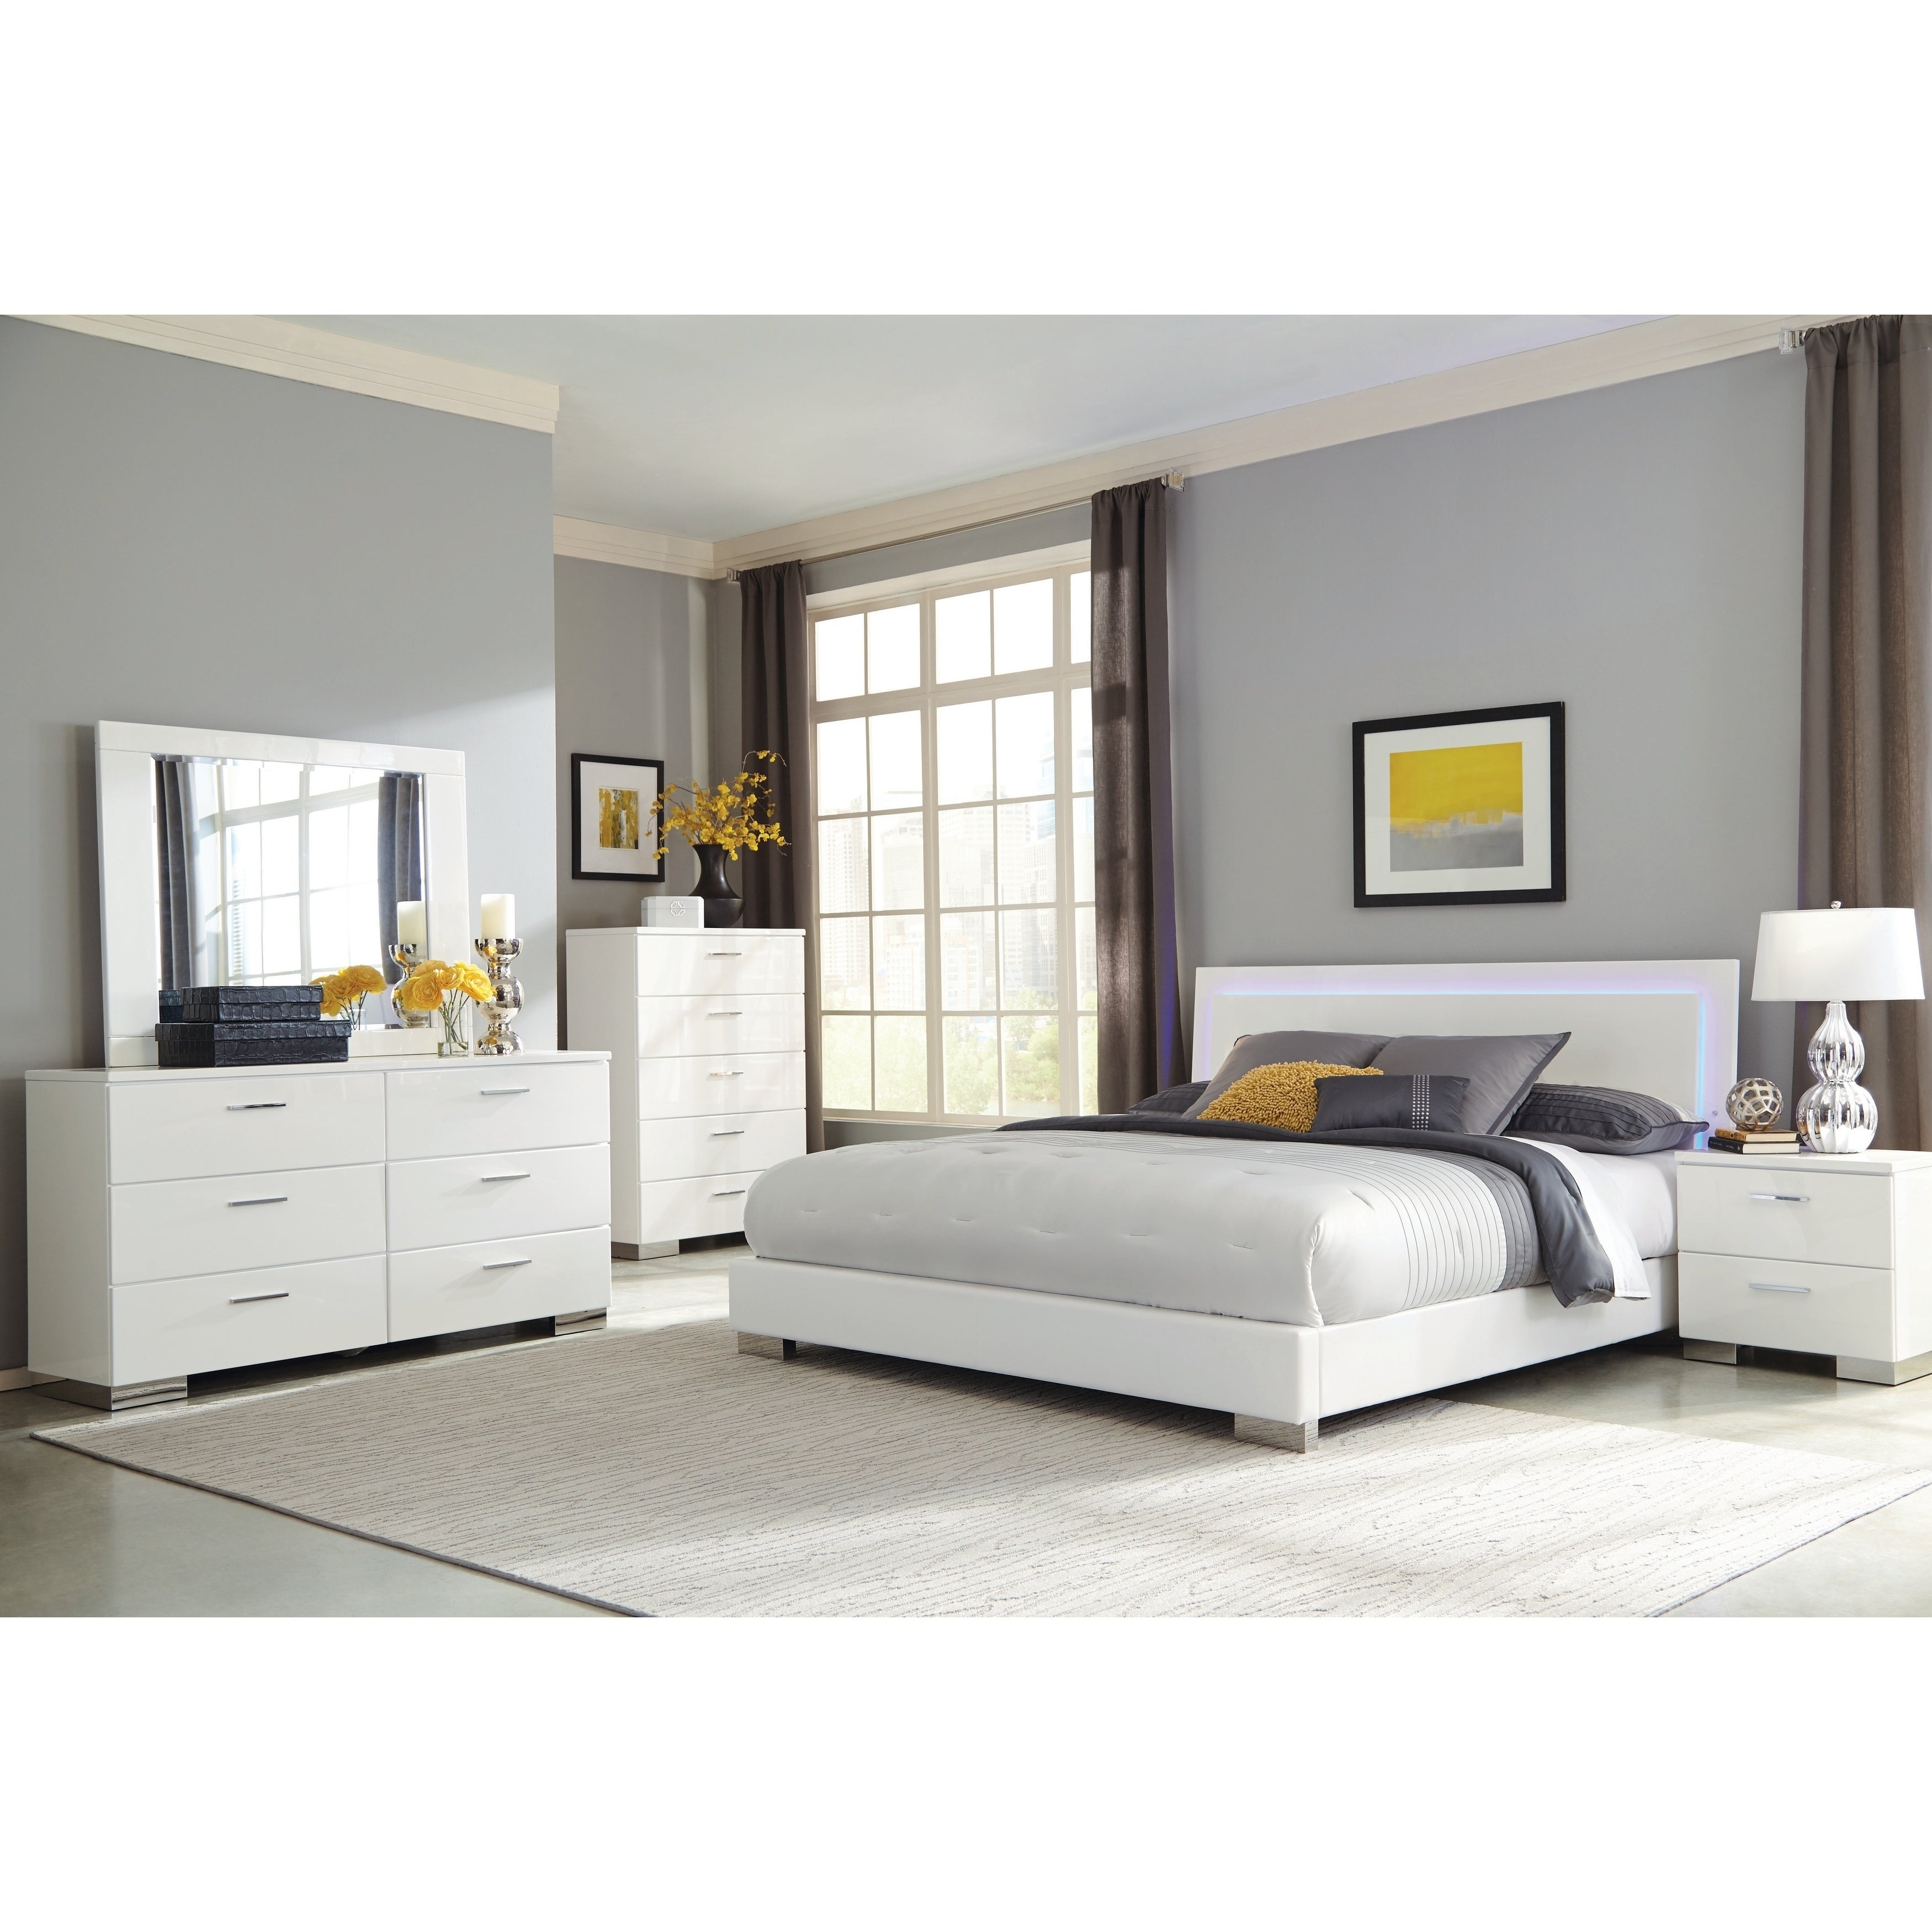 Strick Bolton Alice White 4 Piece Bedroom Set With Led Headboard pertaining to dimensions 3500 X 3500